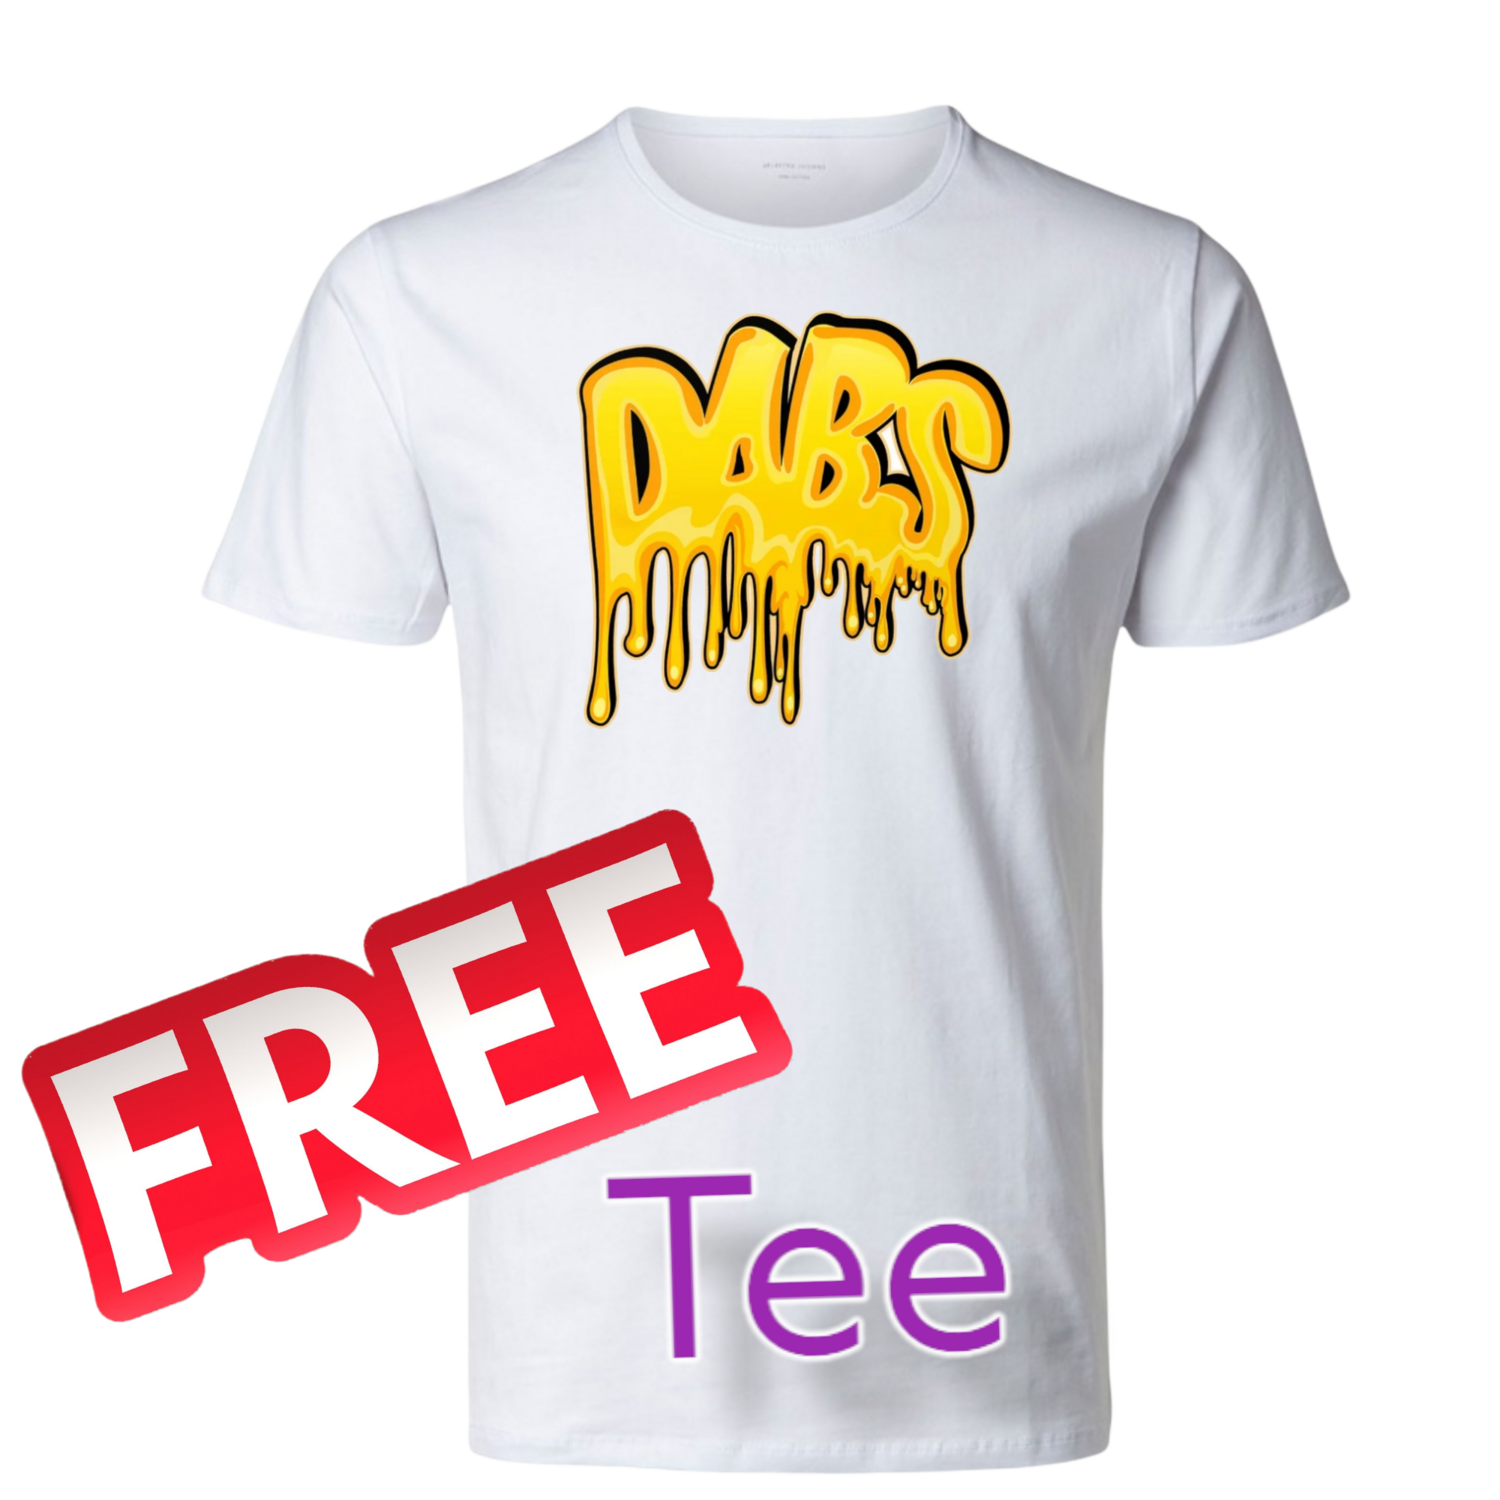 FREE T SHIRT  DABS EDITION 
Only small to xl is free anything bigger  is a lil extra